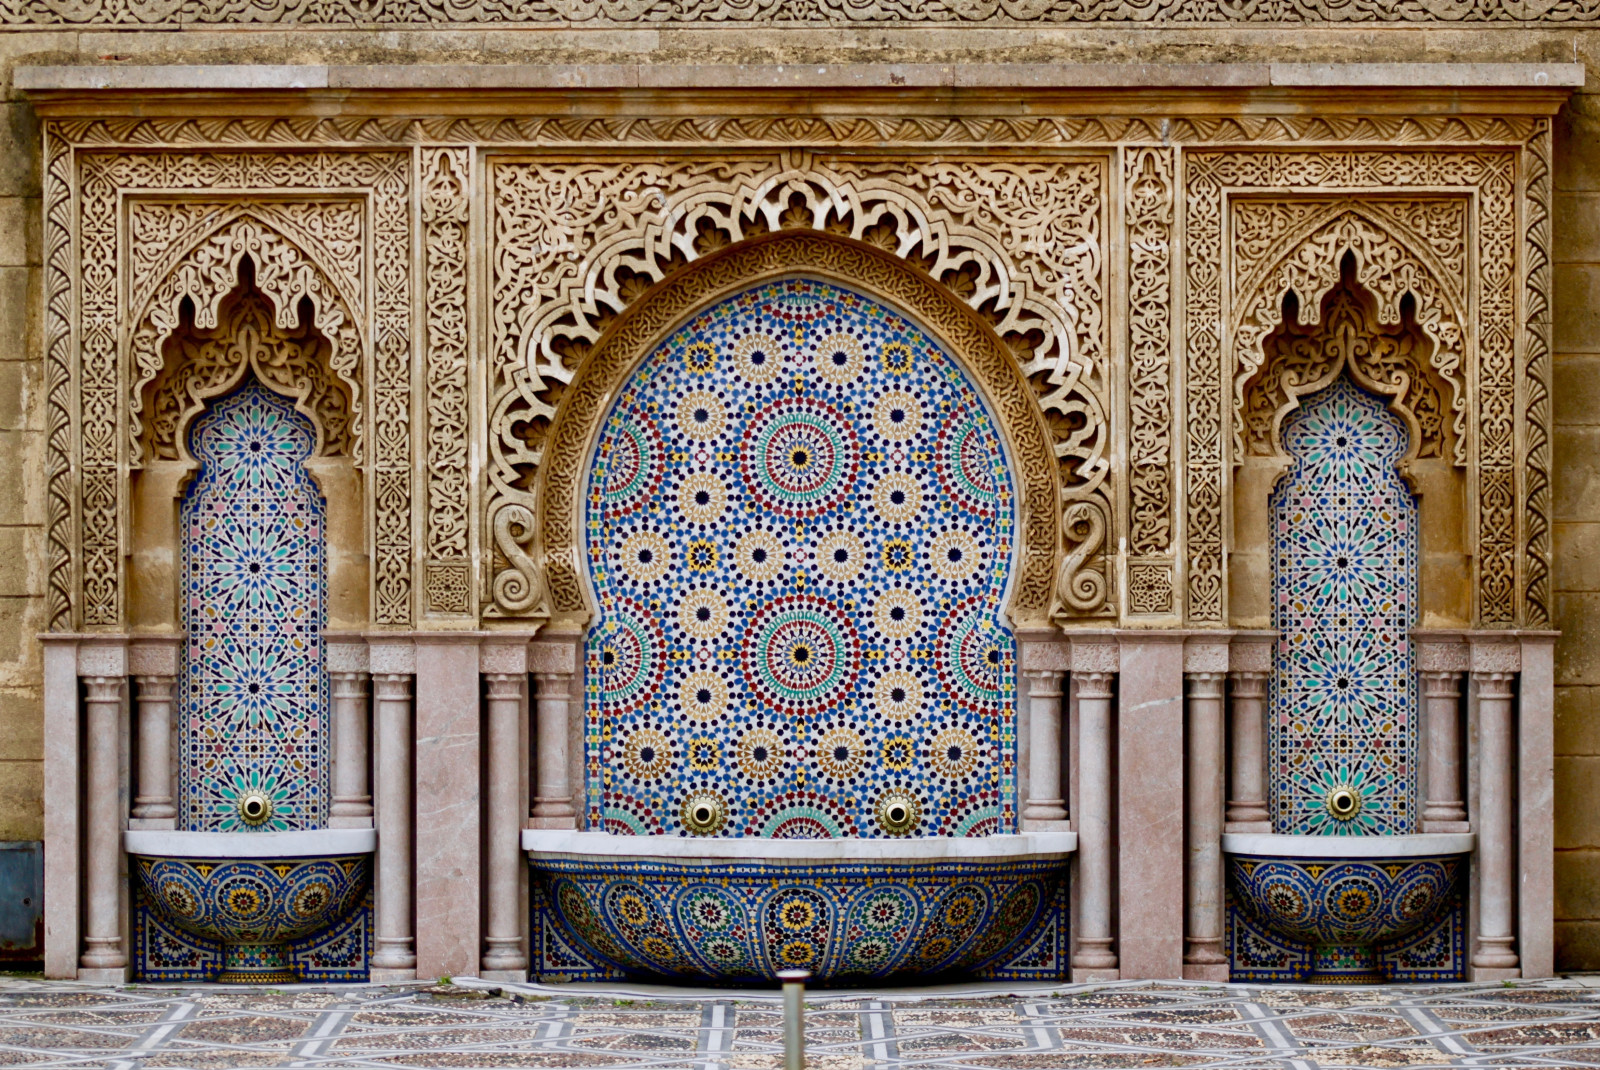 Colorful mosaic of tile on a wall with gold embellishments.